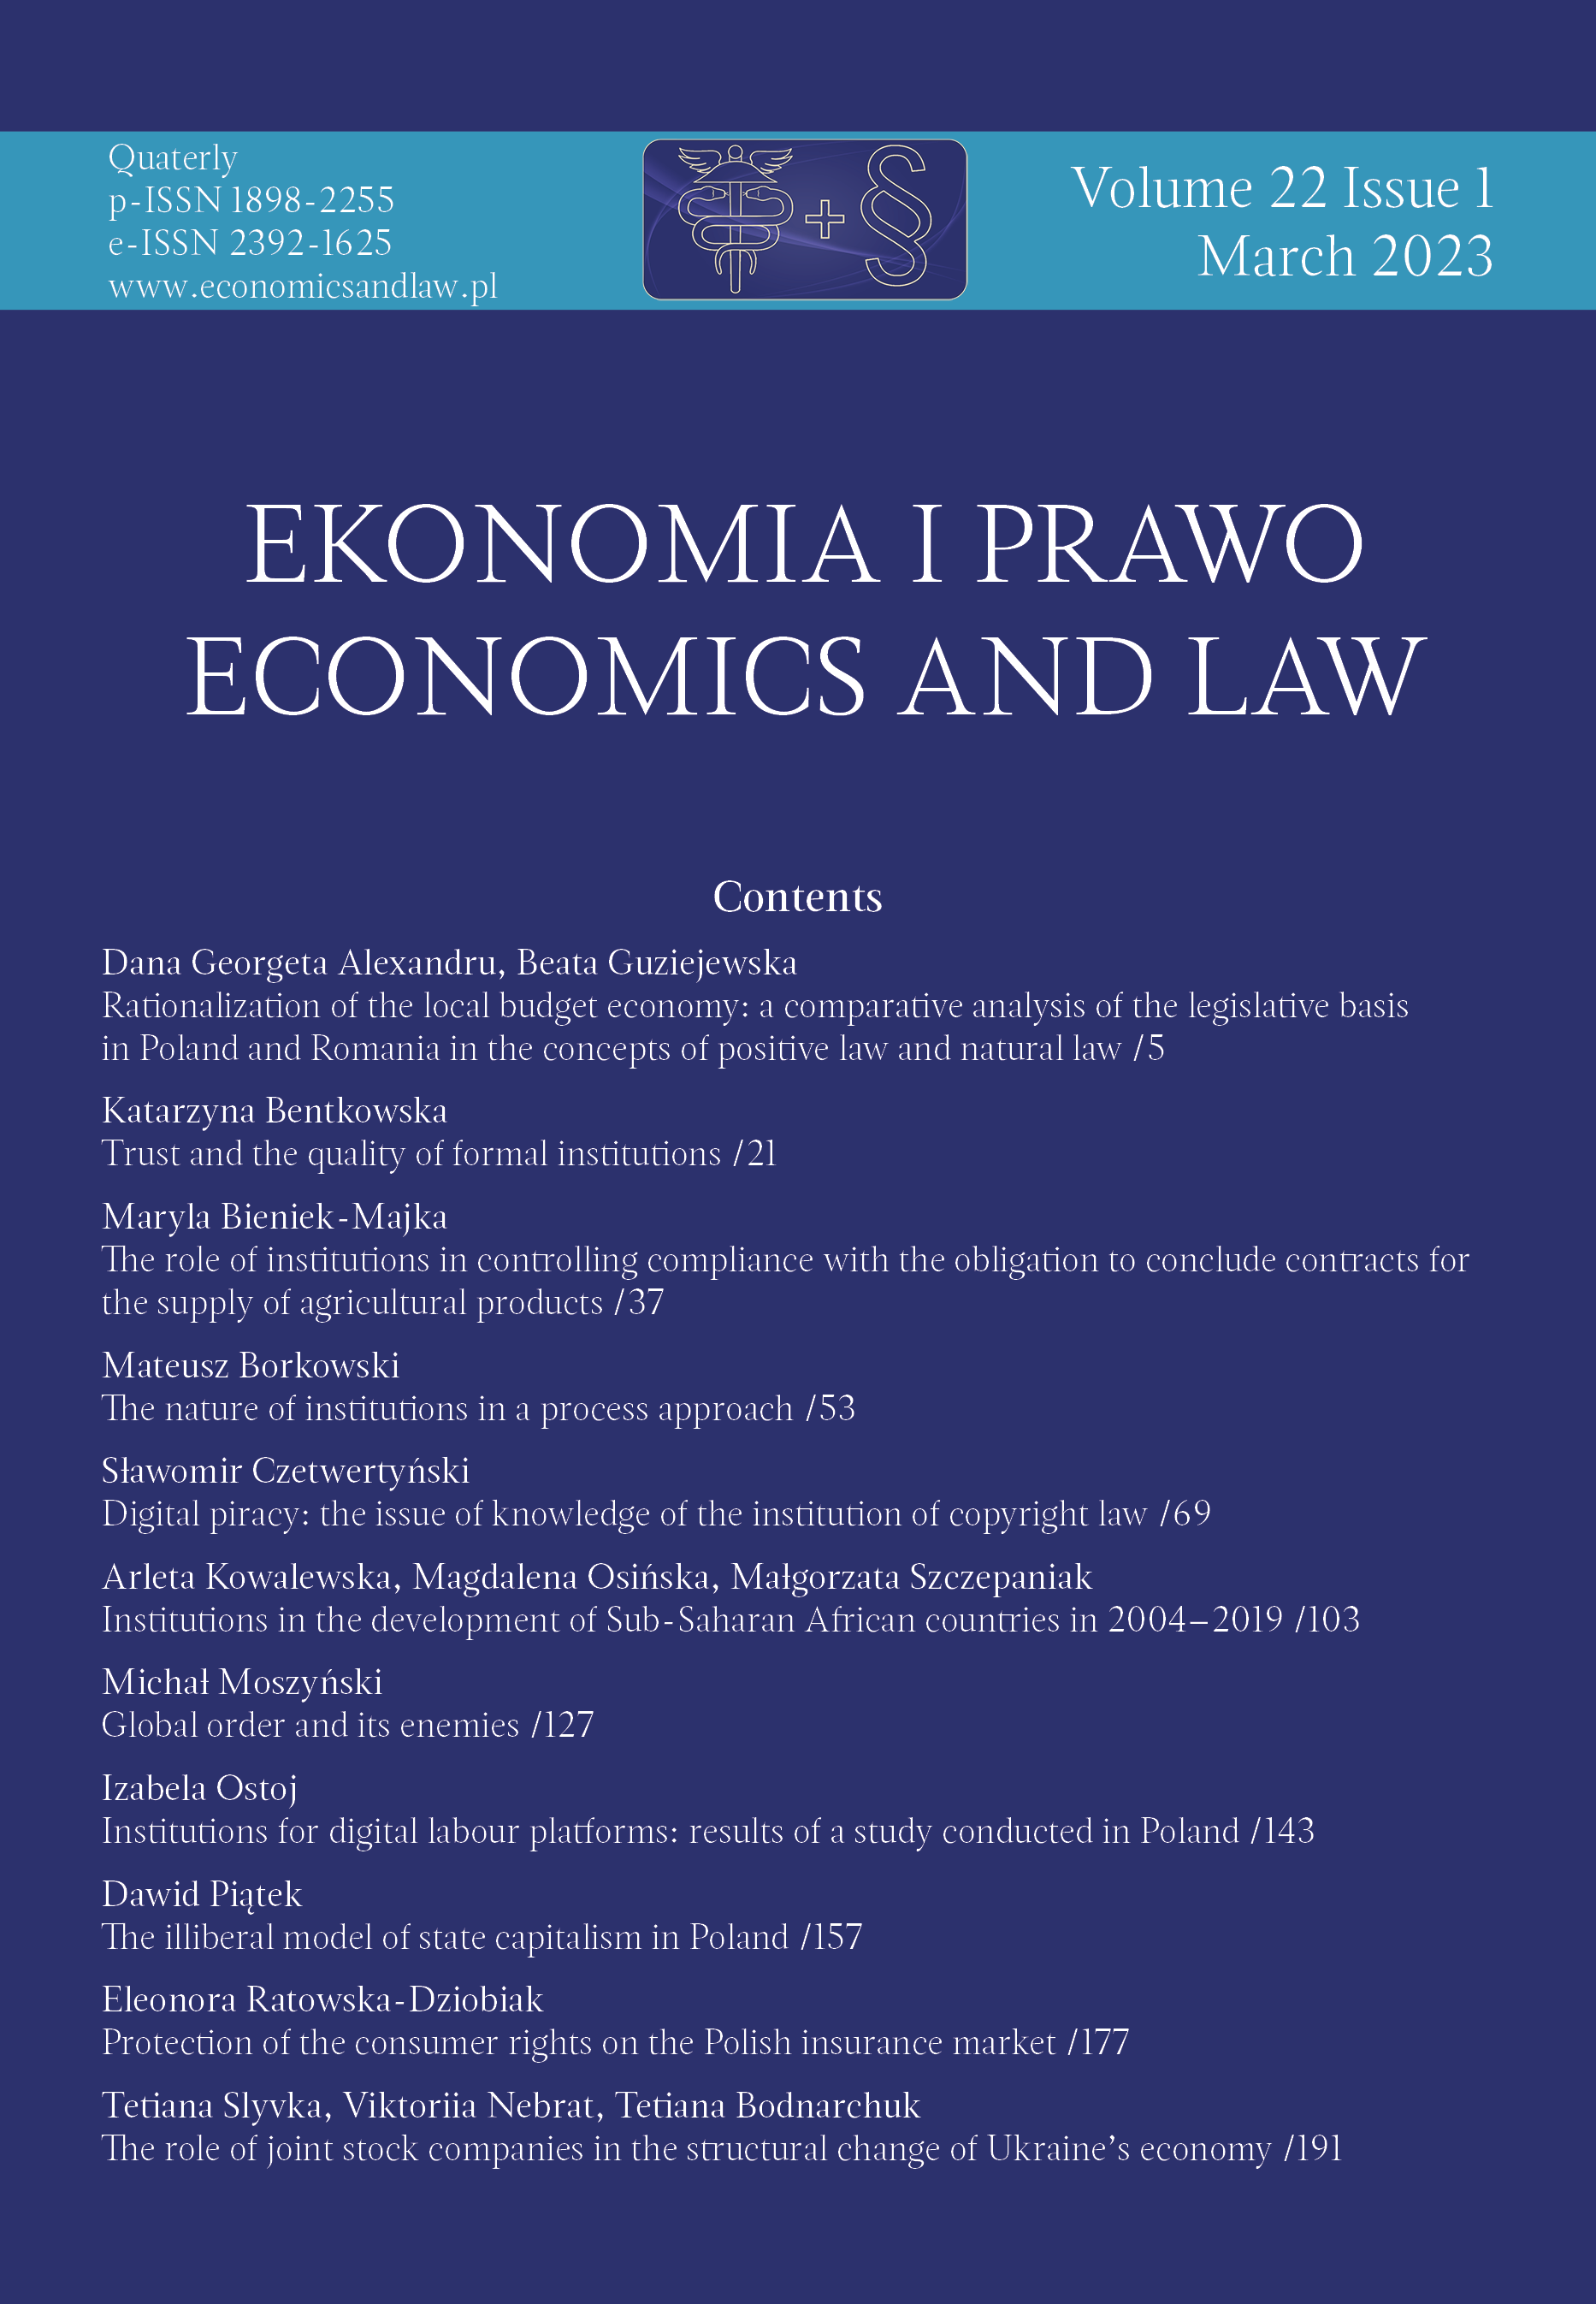 Institutions for digital labour platforms:
results of a study conducted in Poland